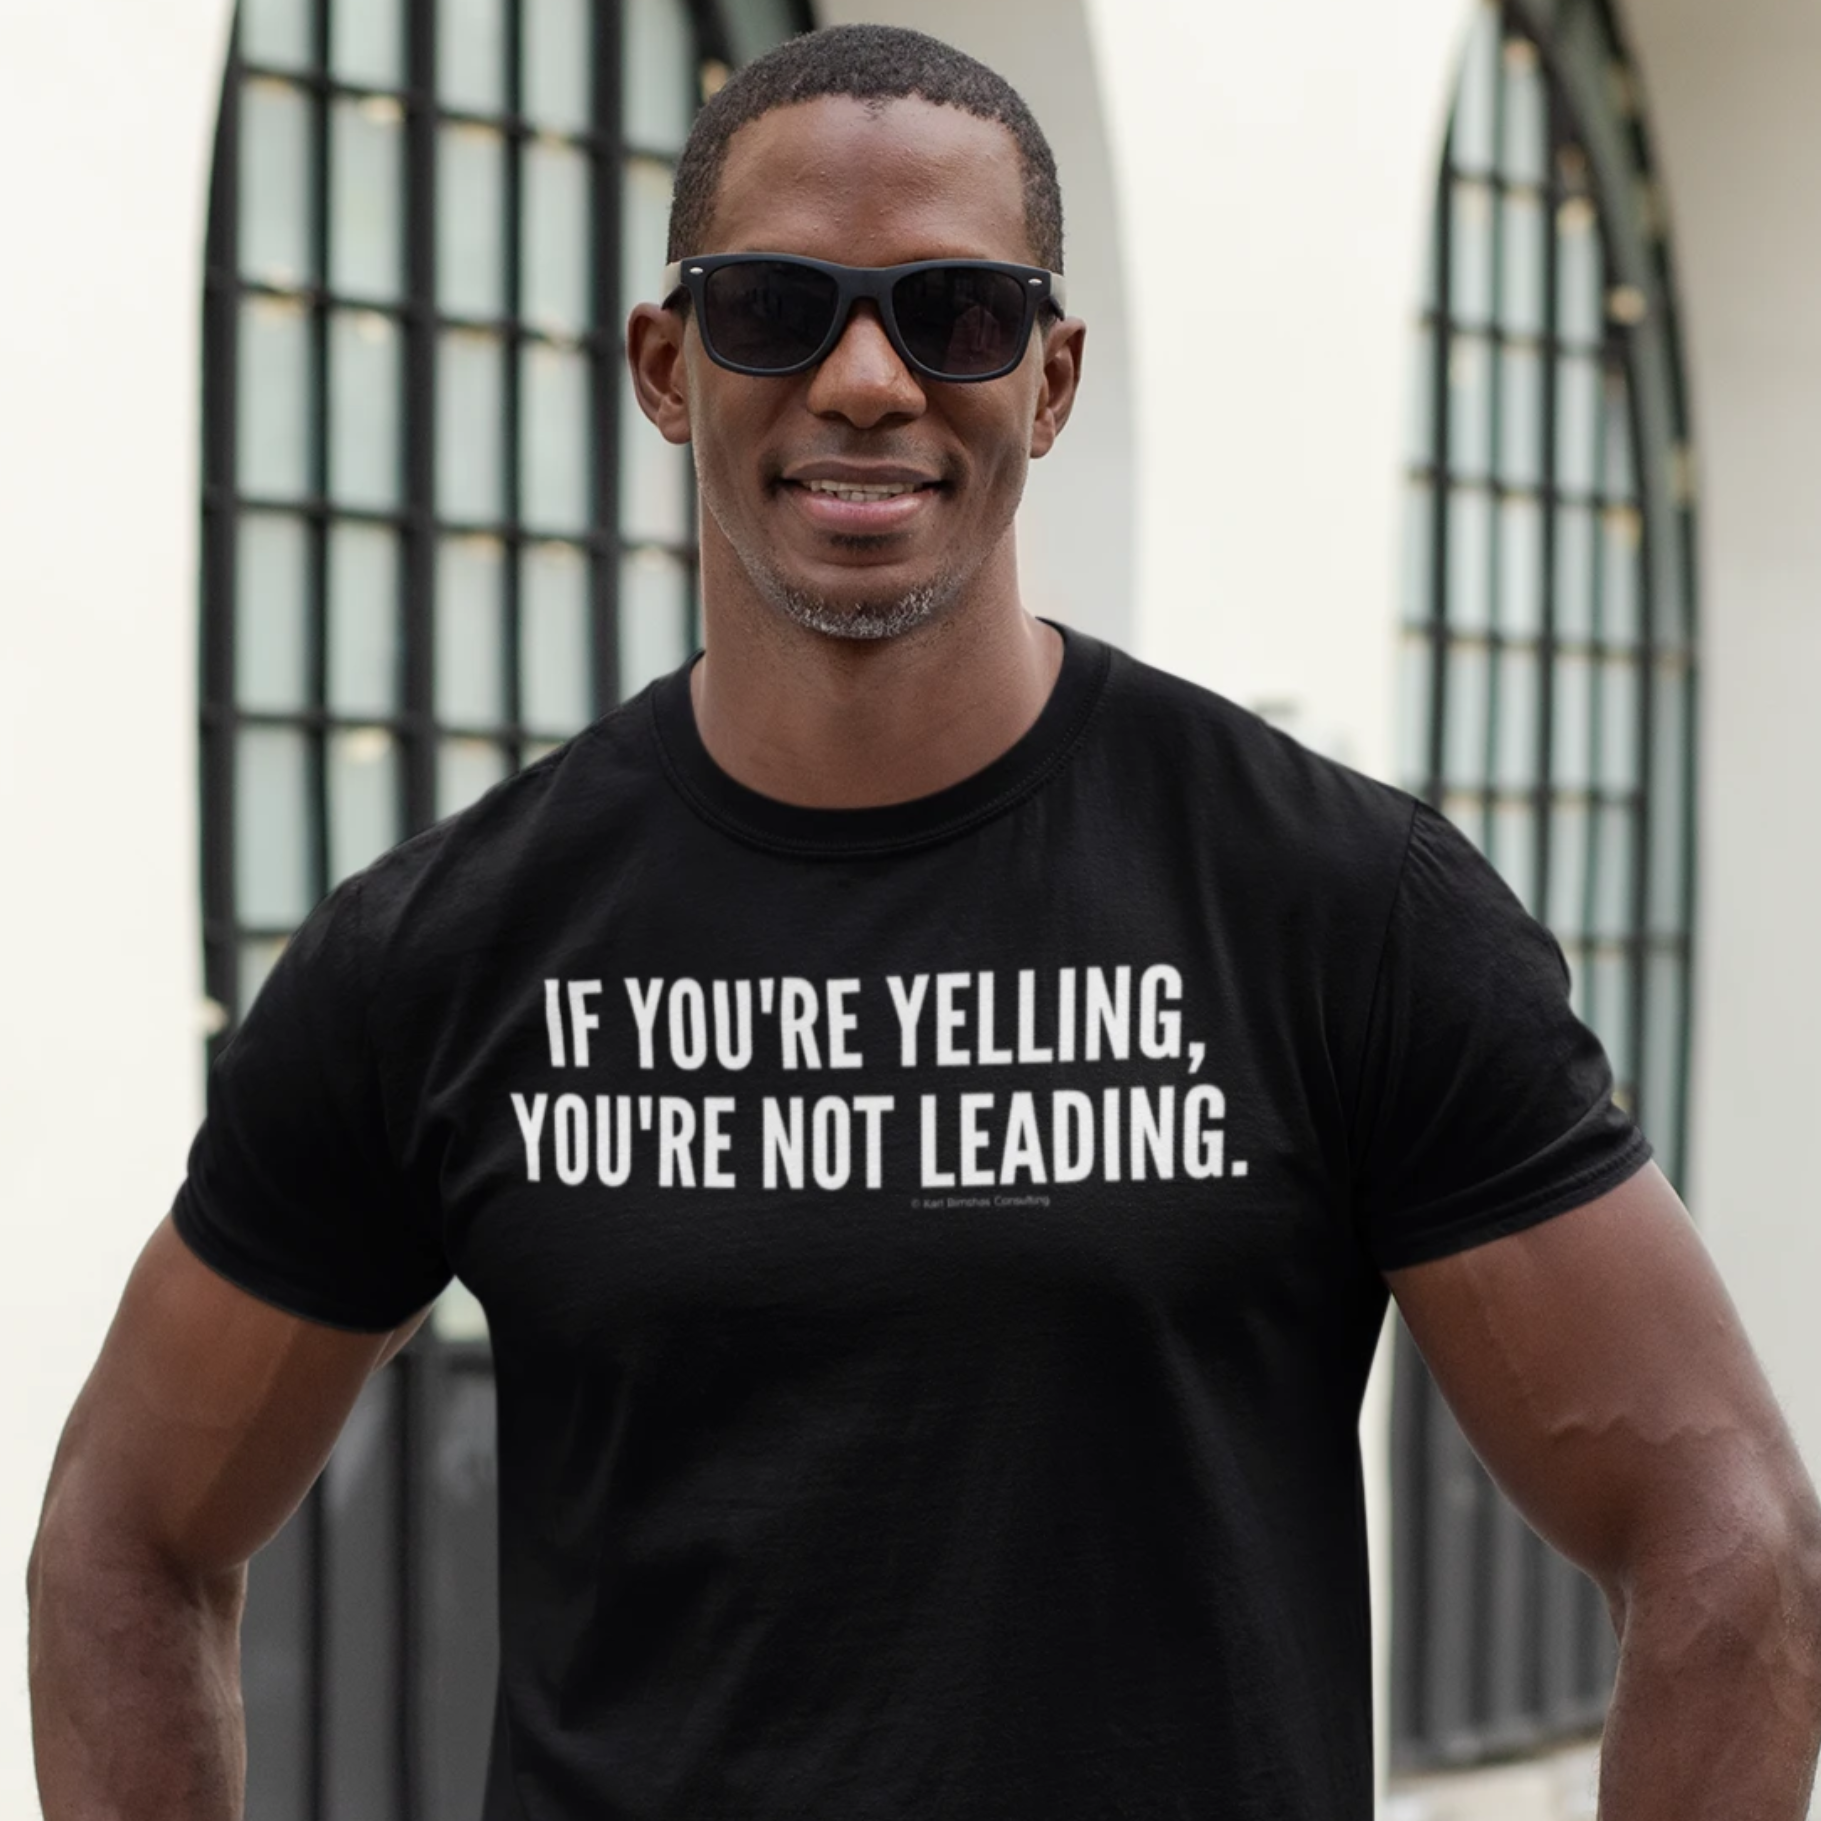 If you are yelling you are not leading